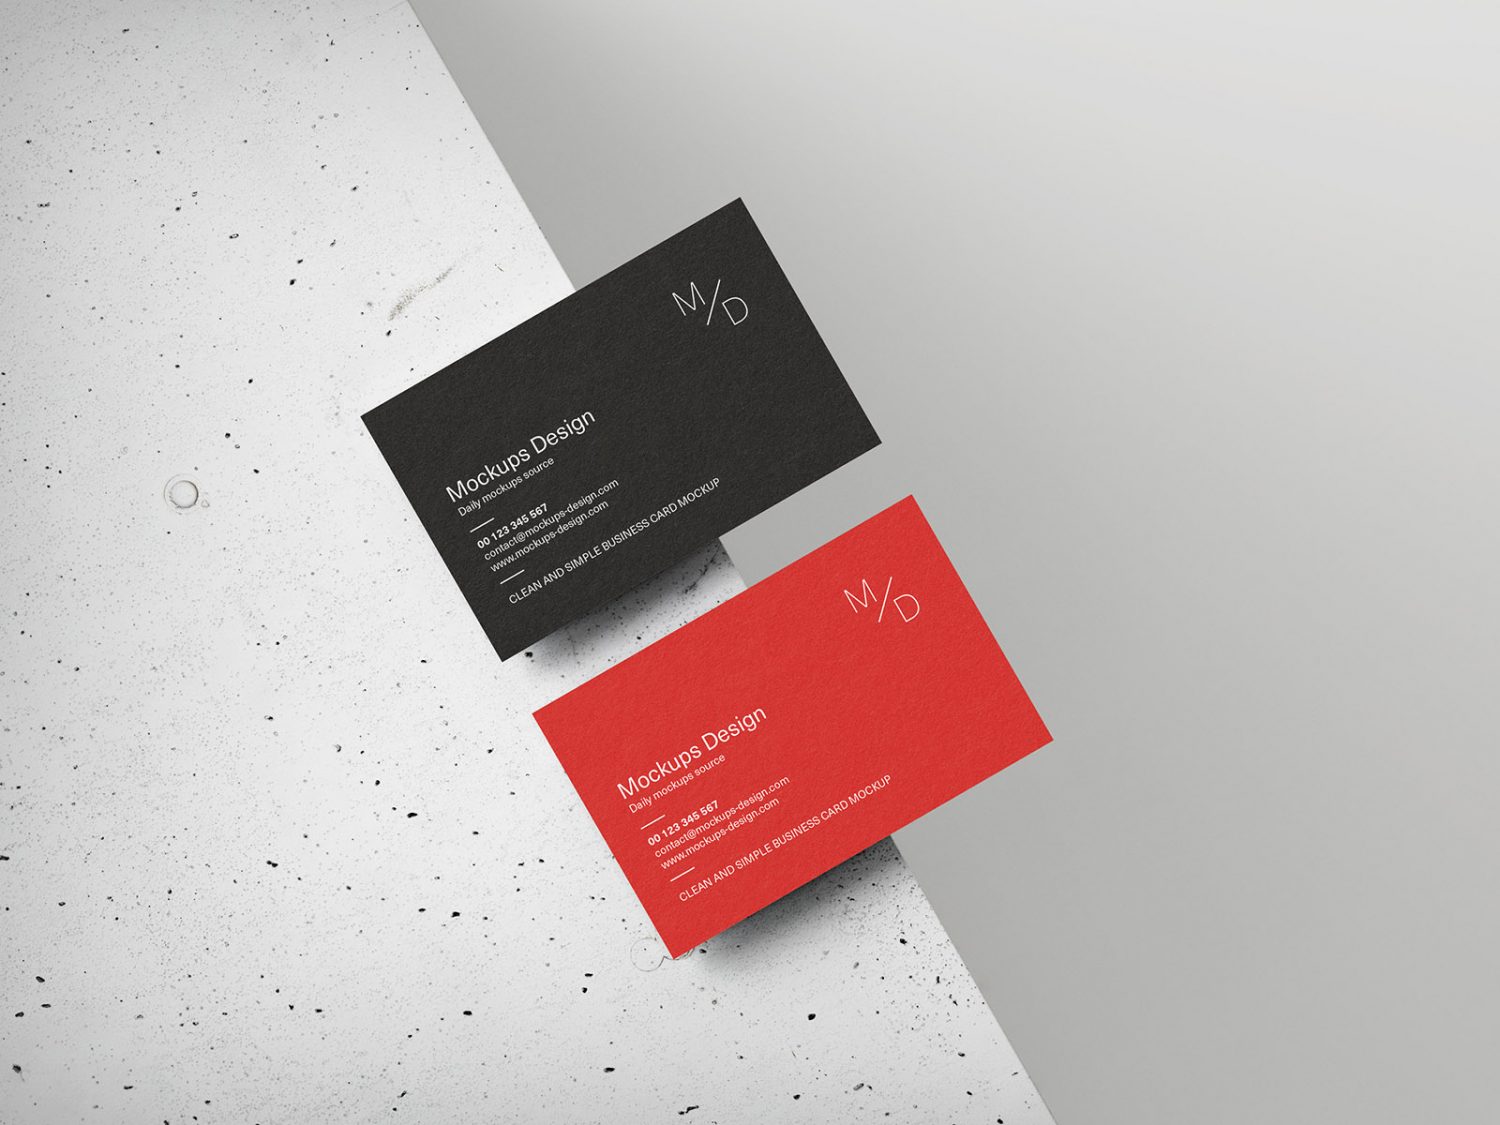 Business Cards on Concrete Cube Mockup